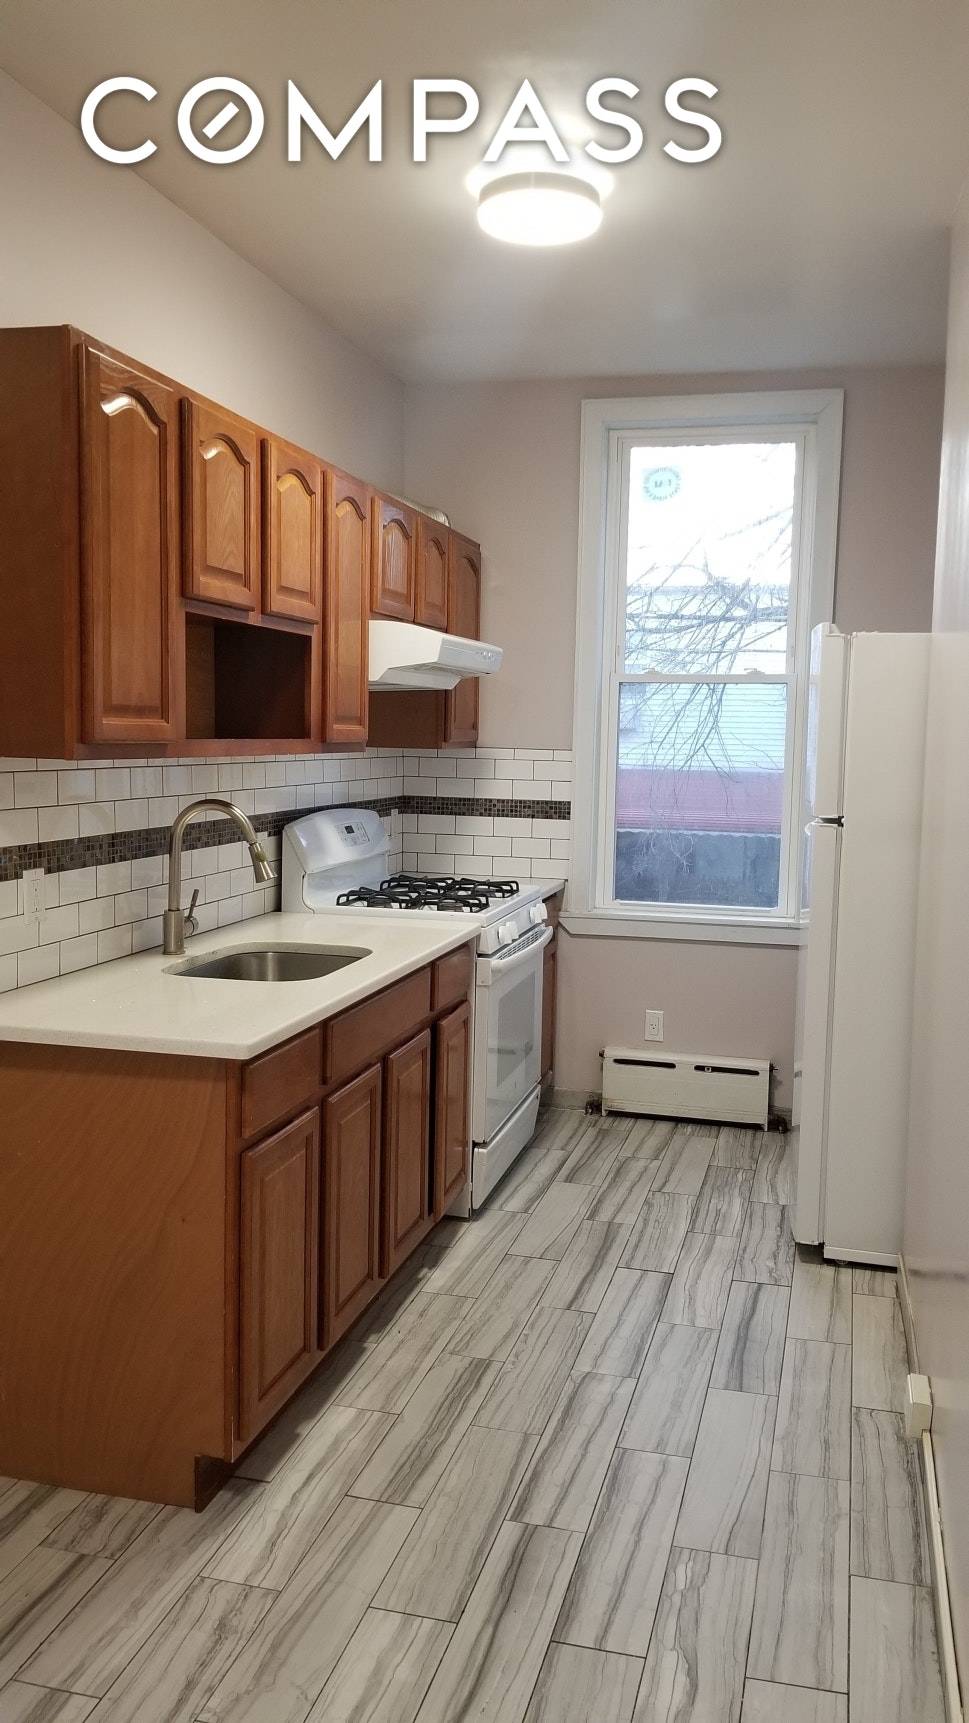 Located in the epicenter of Bushwick, this sprawling 1200 sq ft, flex three bedroom, floor through apartment is available for lease on the first floor of a two family townhouse.